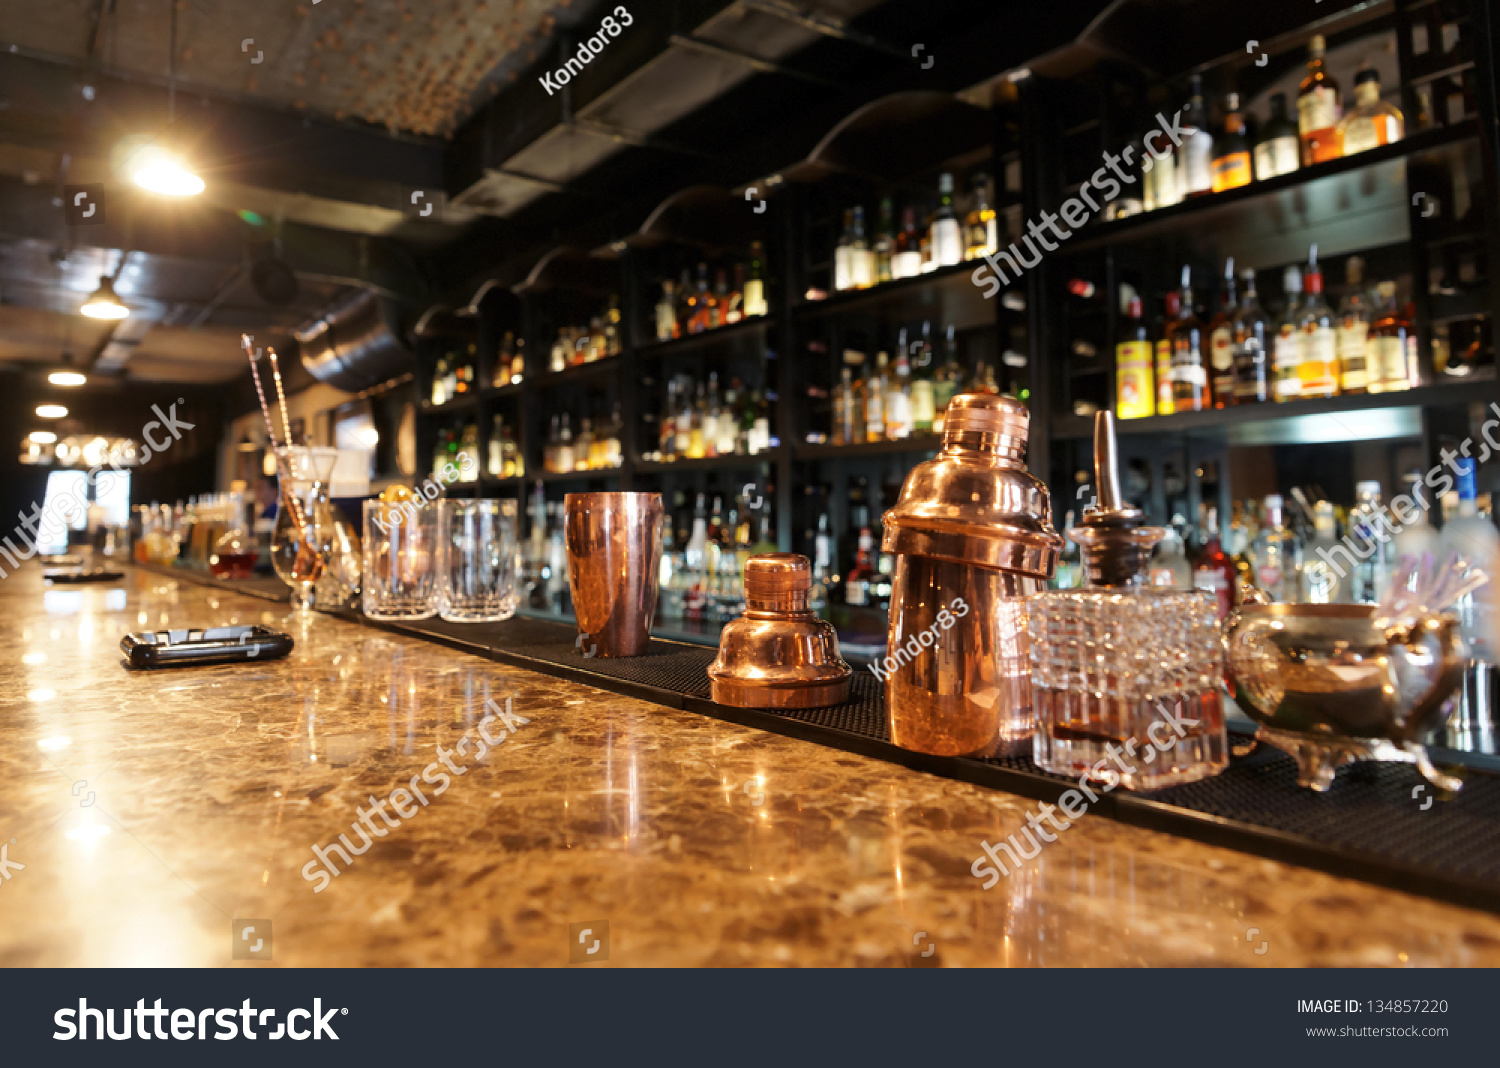 Classic Bar Counter Bottles Blurred Background Stock Photo ...